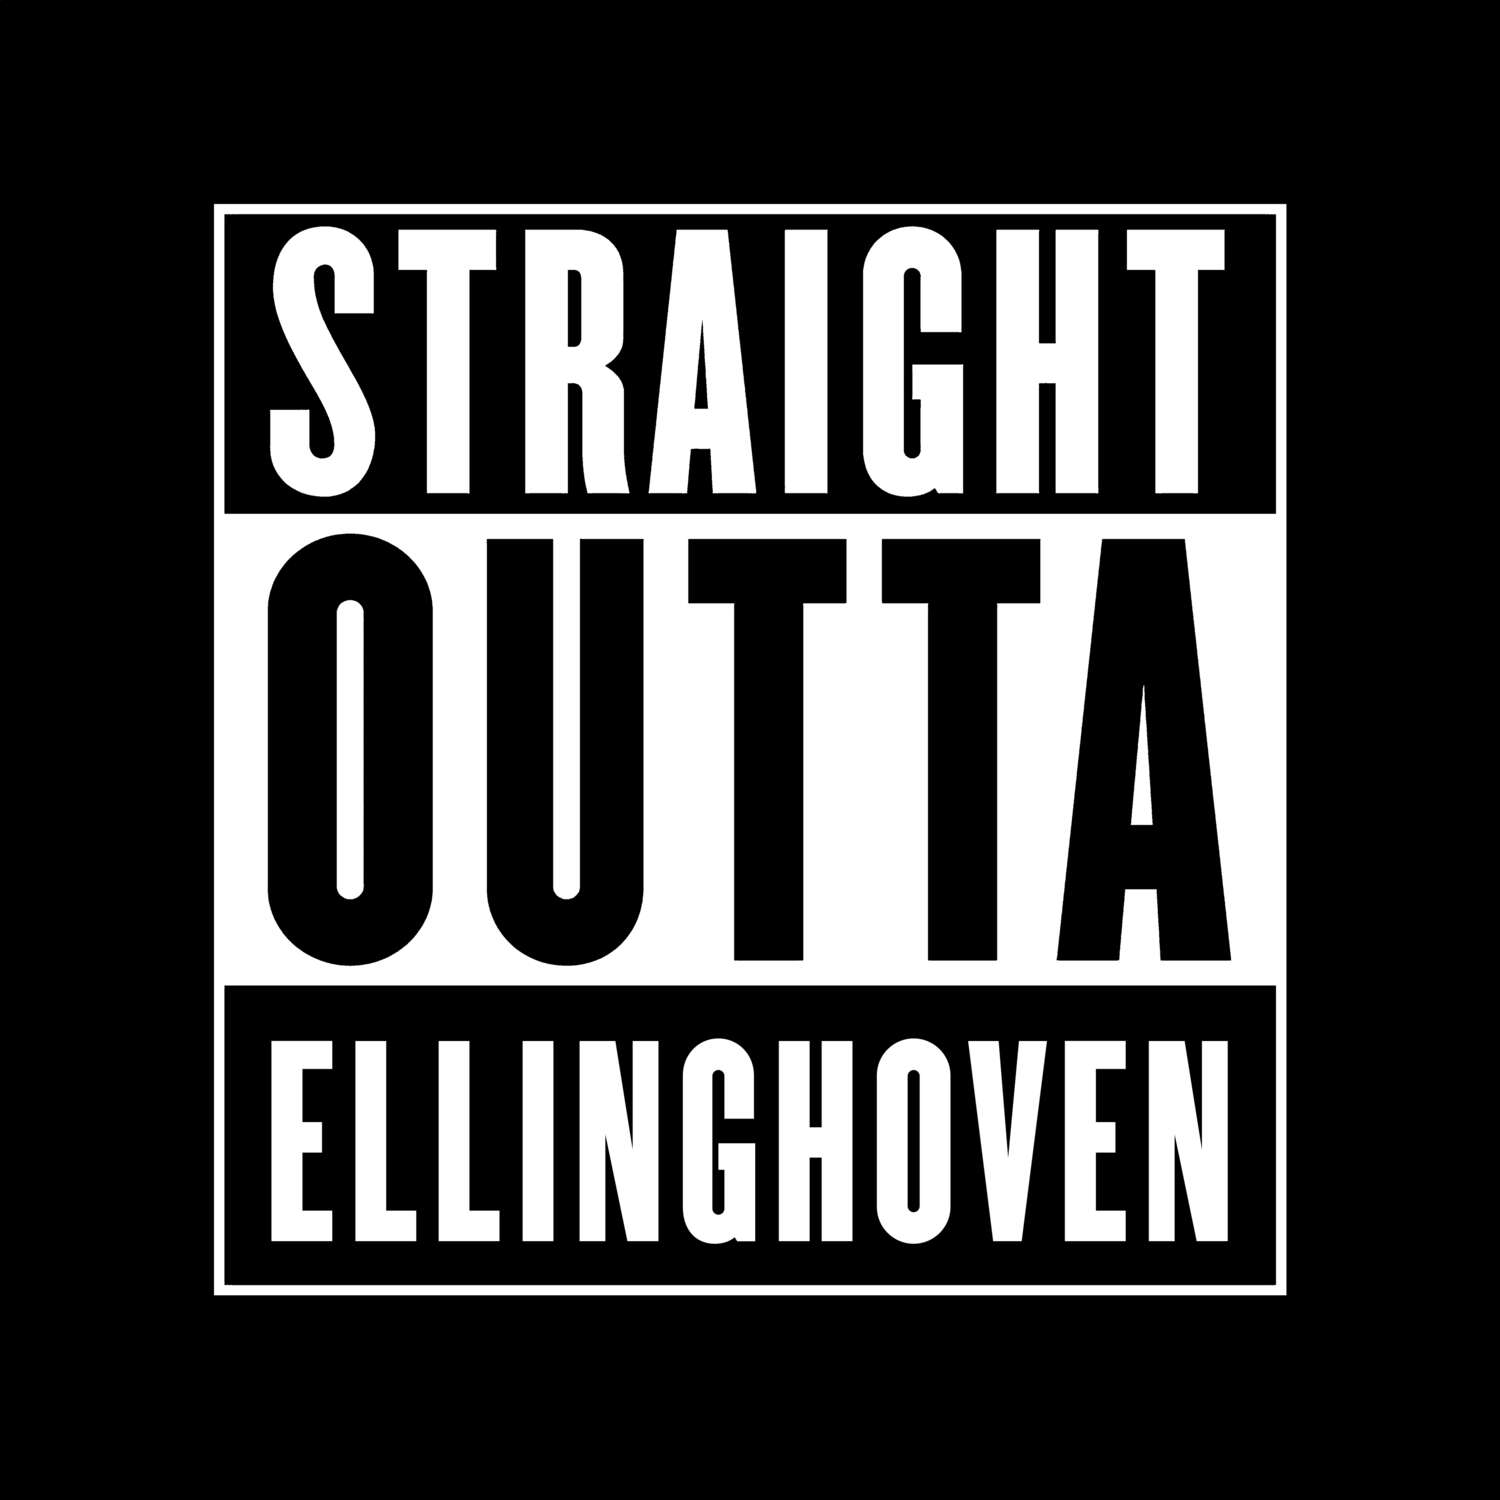 Ellinghoven T-Shirt »Straight Outta«